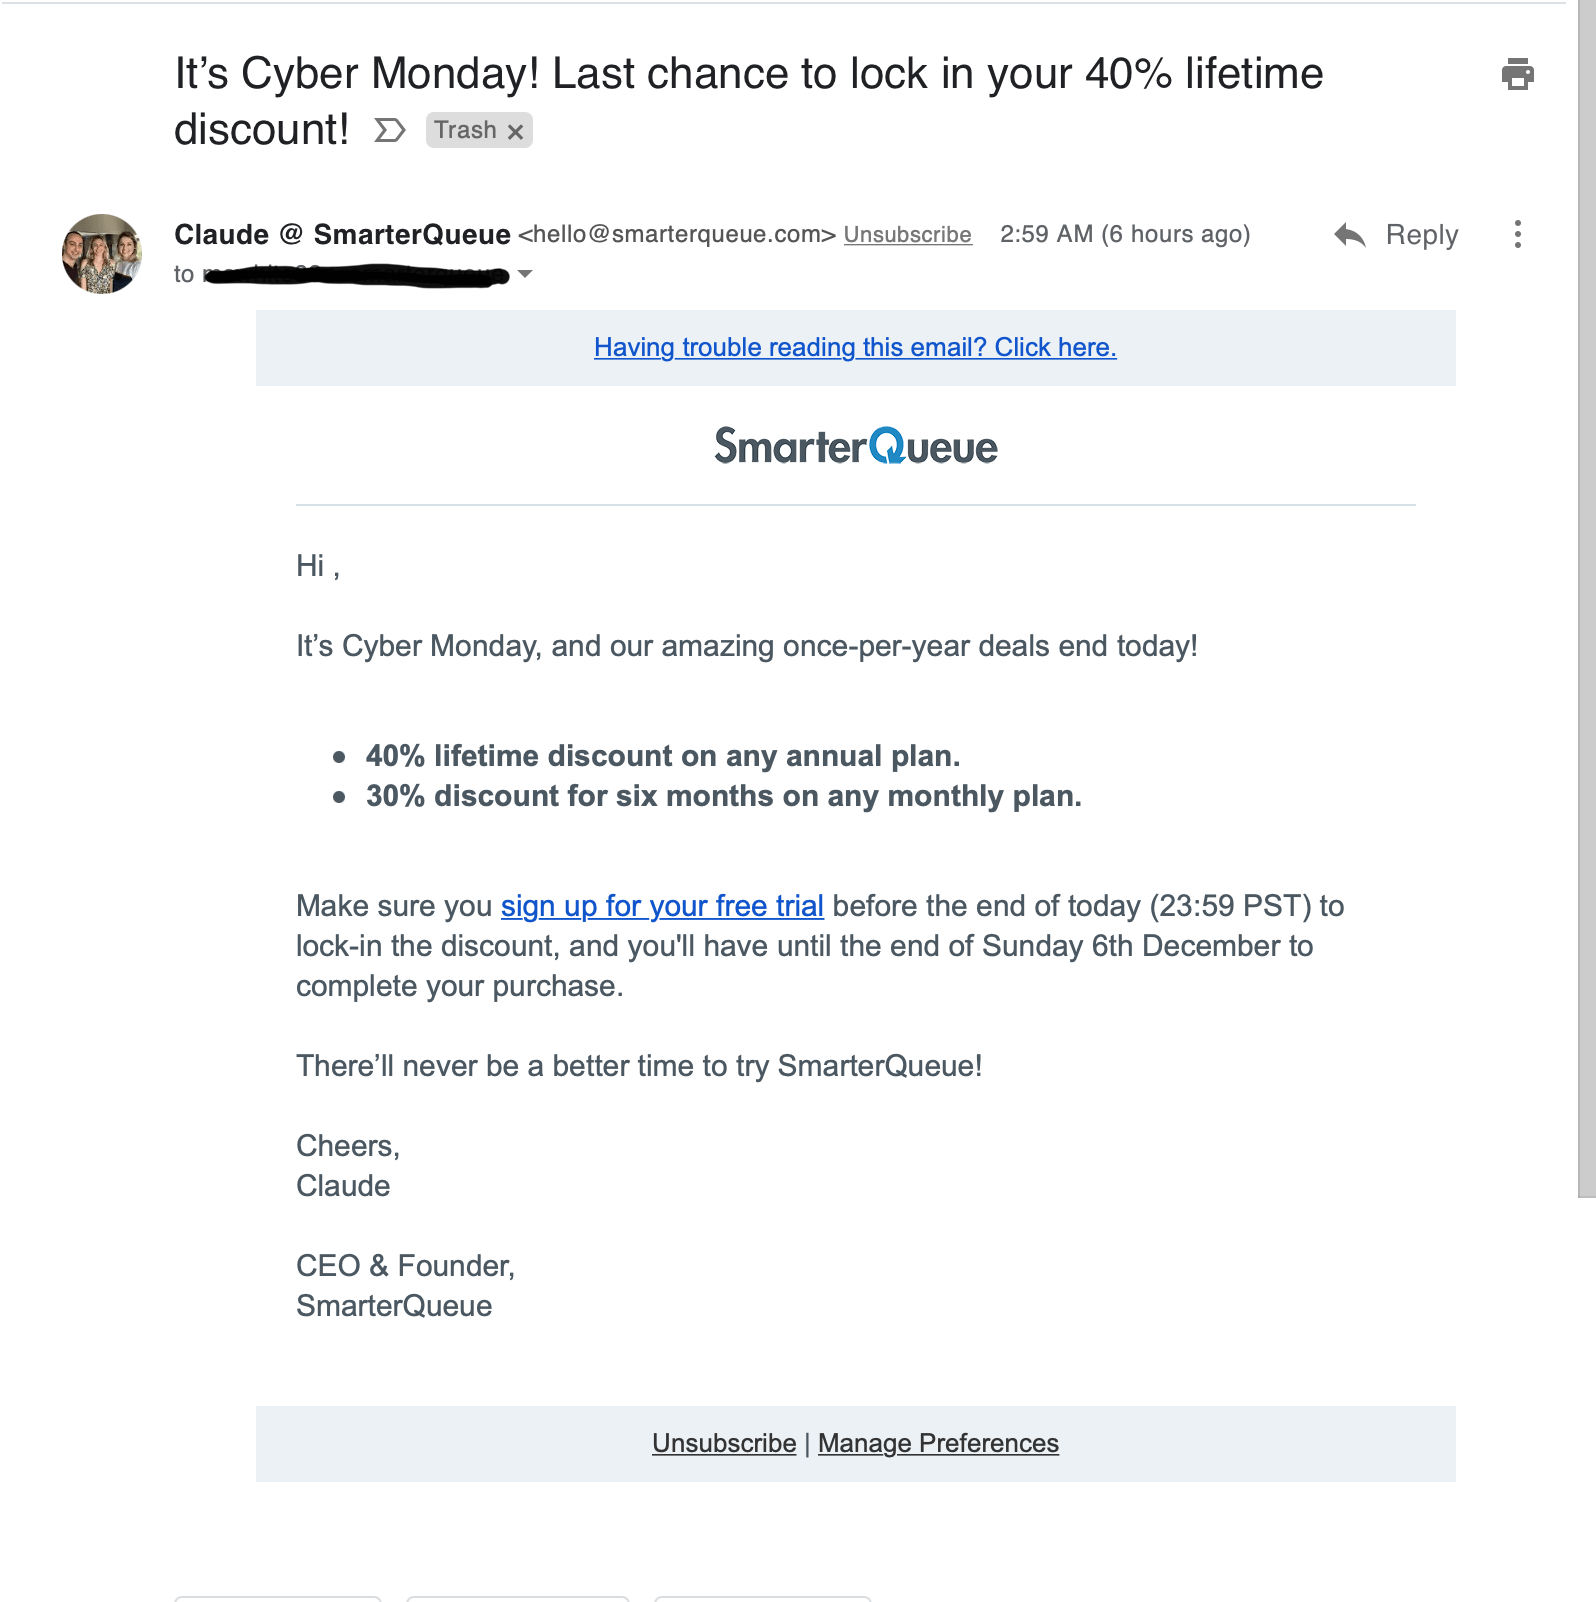 Email from Smarter Queue after loading images